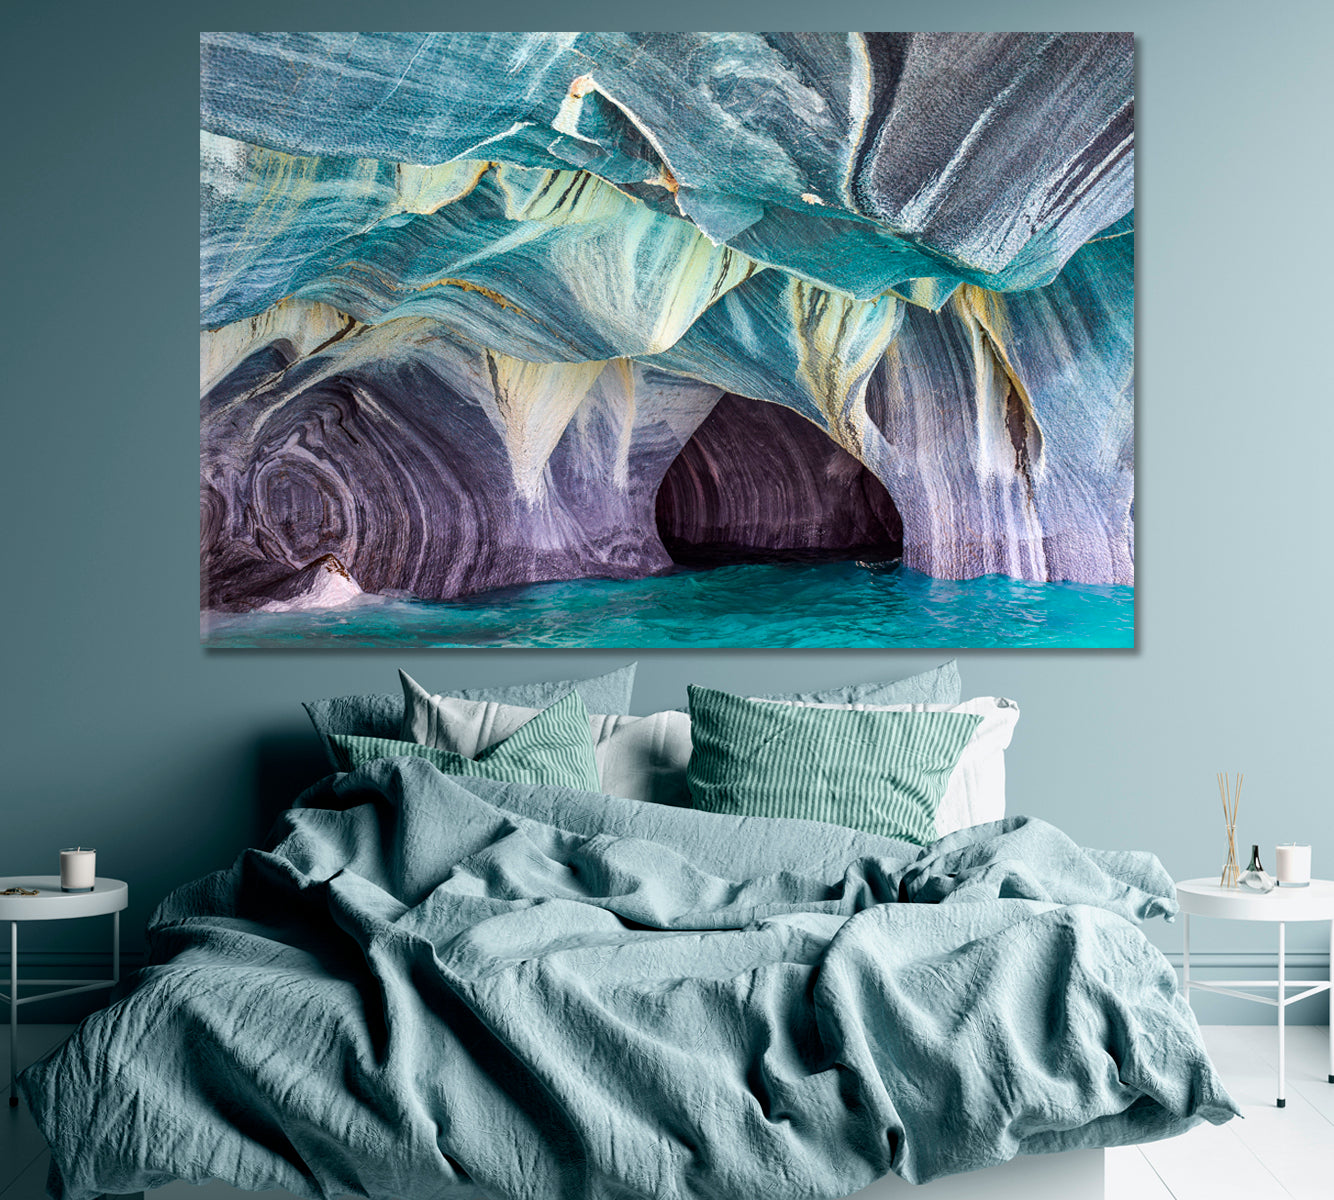 Marble Caves in Chile Patagonia Canvas Print ArtLexy 1 Panel 24"x16" inches 